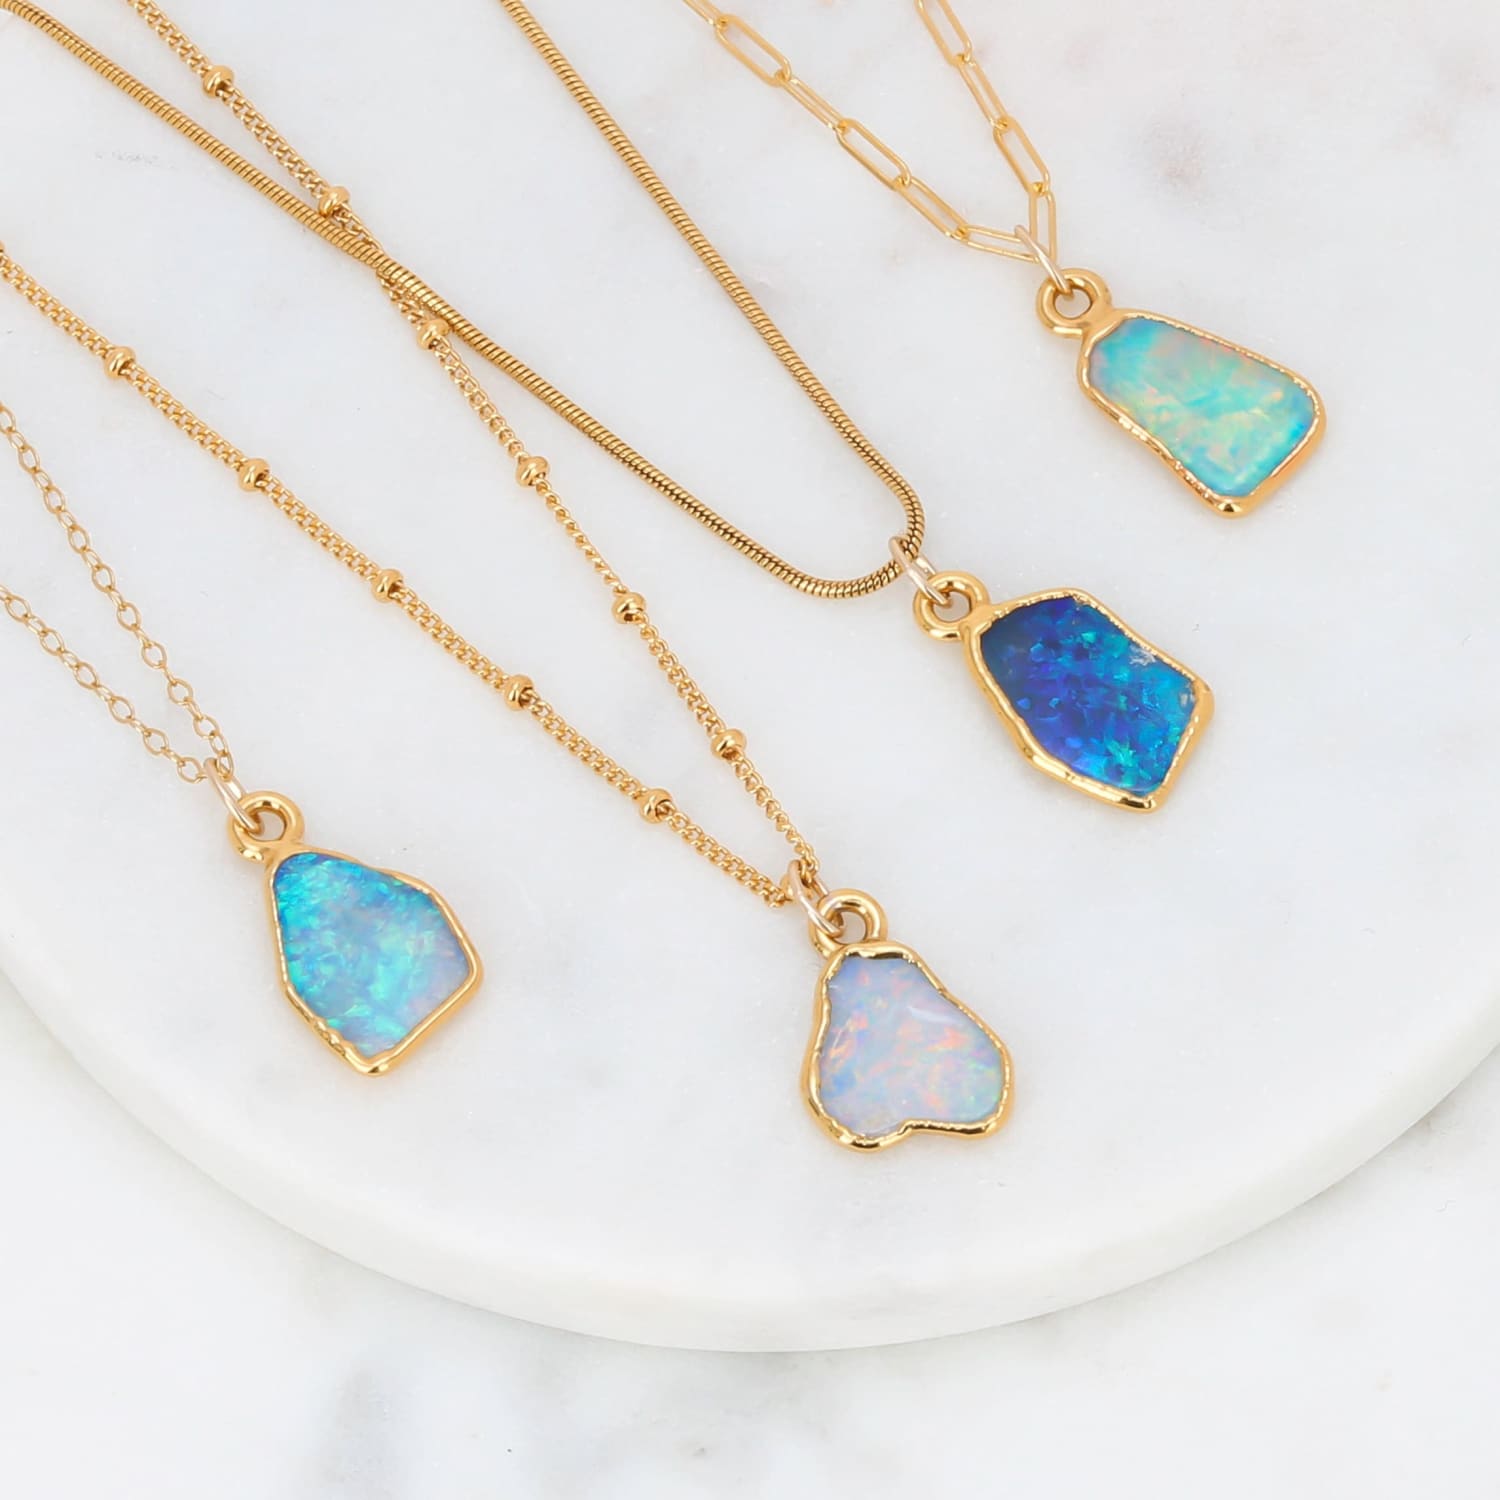 Buy Protection Crystal Necklace, Crystal Good Luck Necklace, Opal and Crystal  Necklace Online in India - Etsy